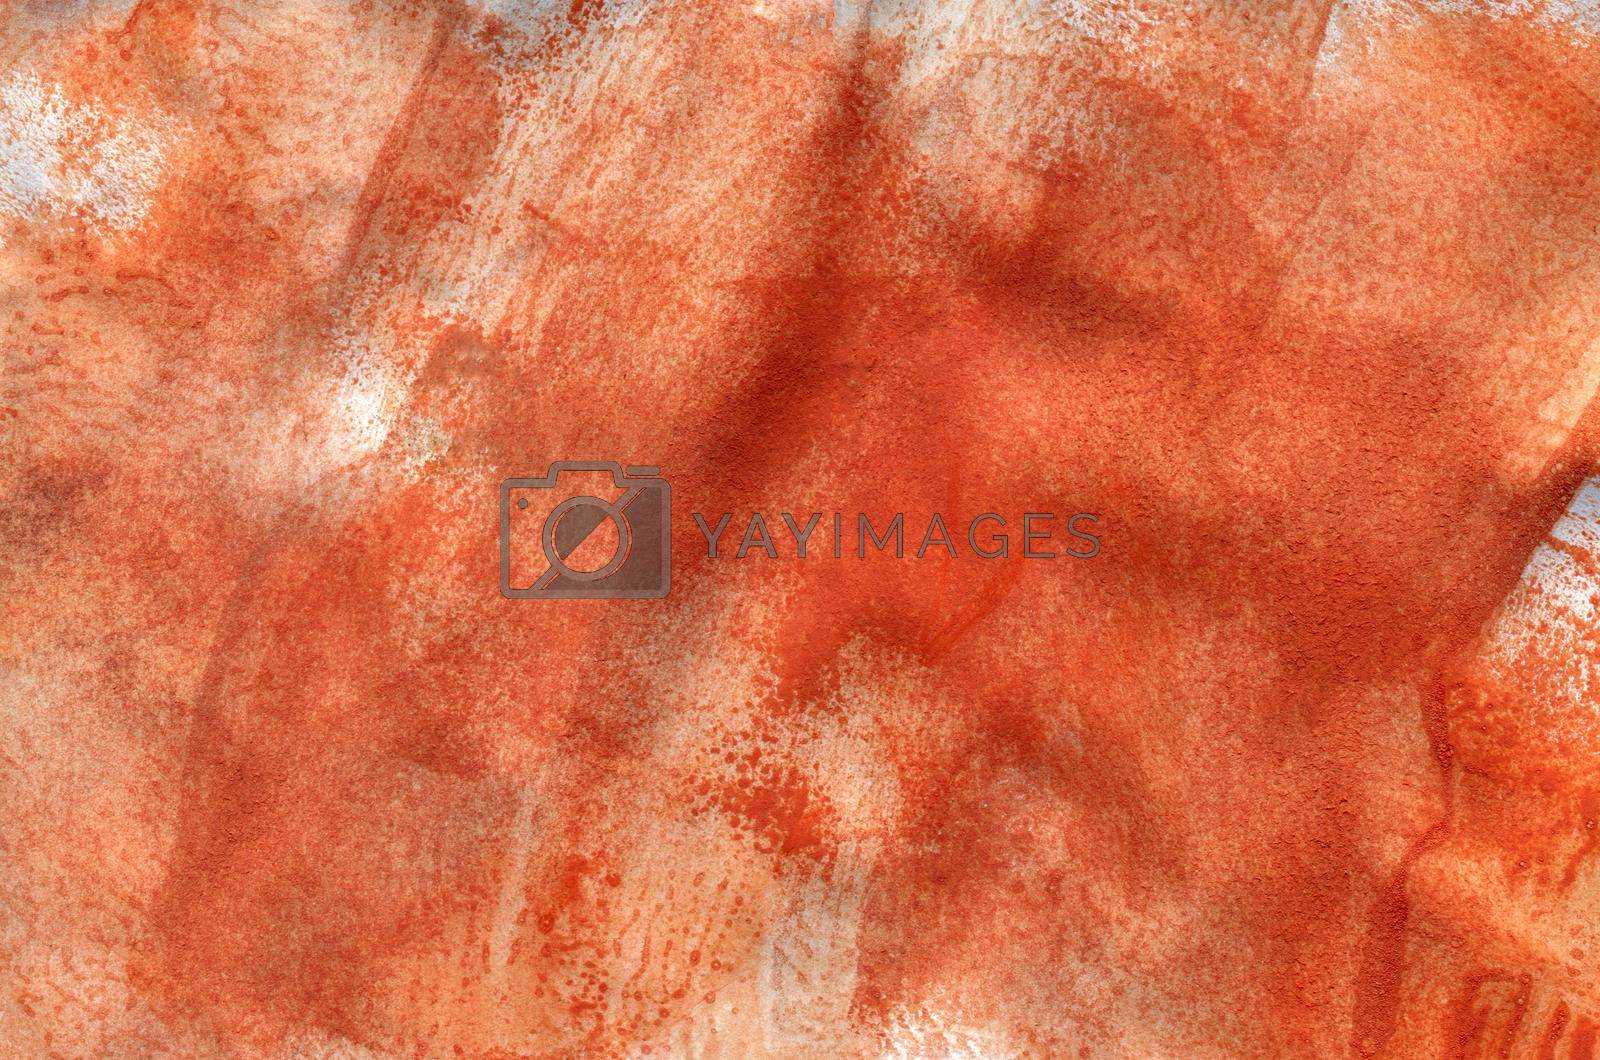 Hand-painted texture of crumped paper. Abstract background, watercolor painting with splashes drop of paint paint smears. Design for backgrounds, wallpapers, covers and packaging, wrapping paper.